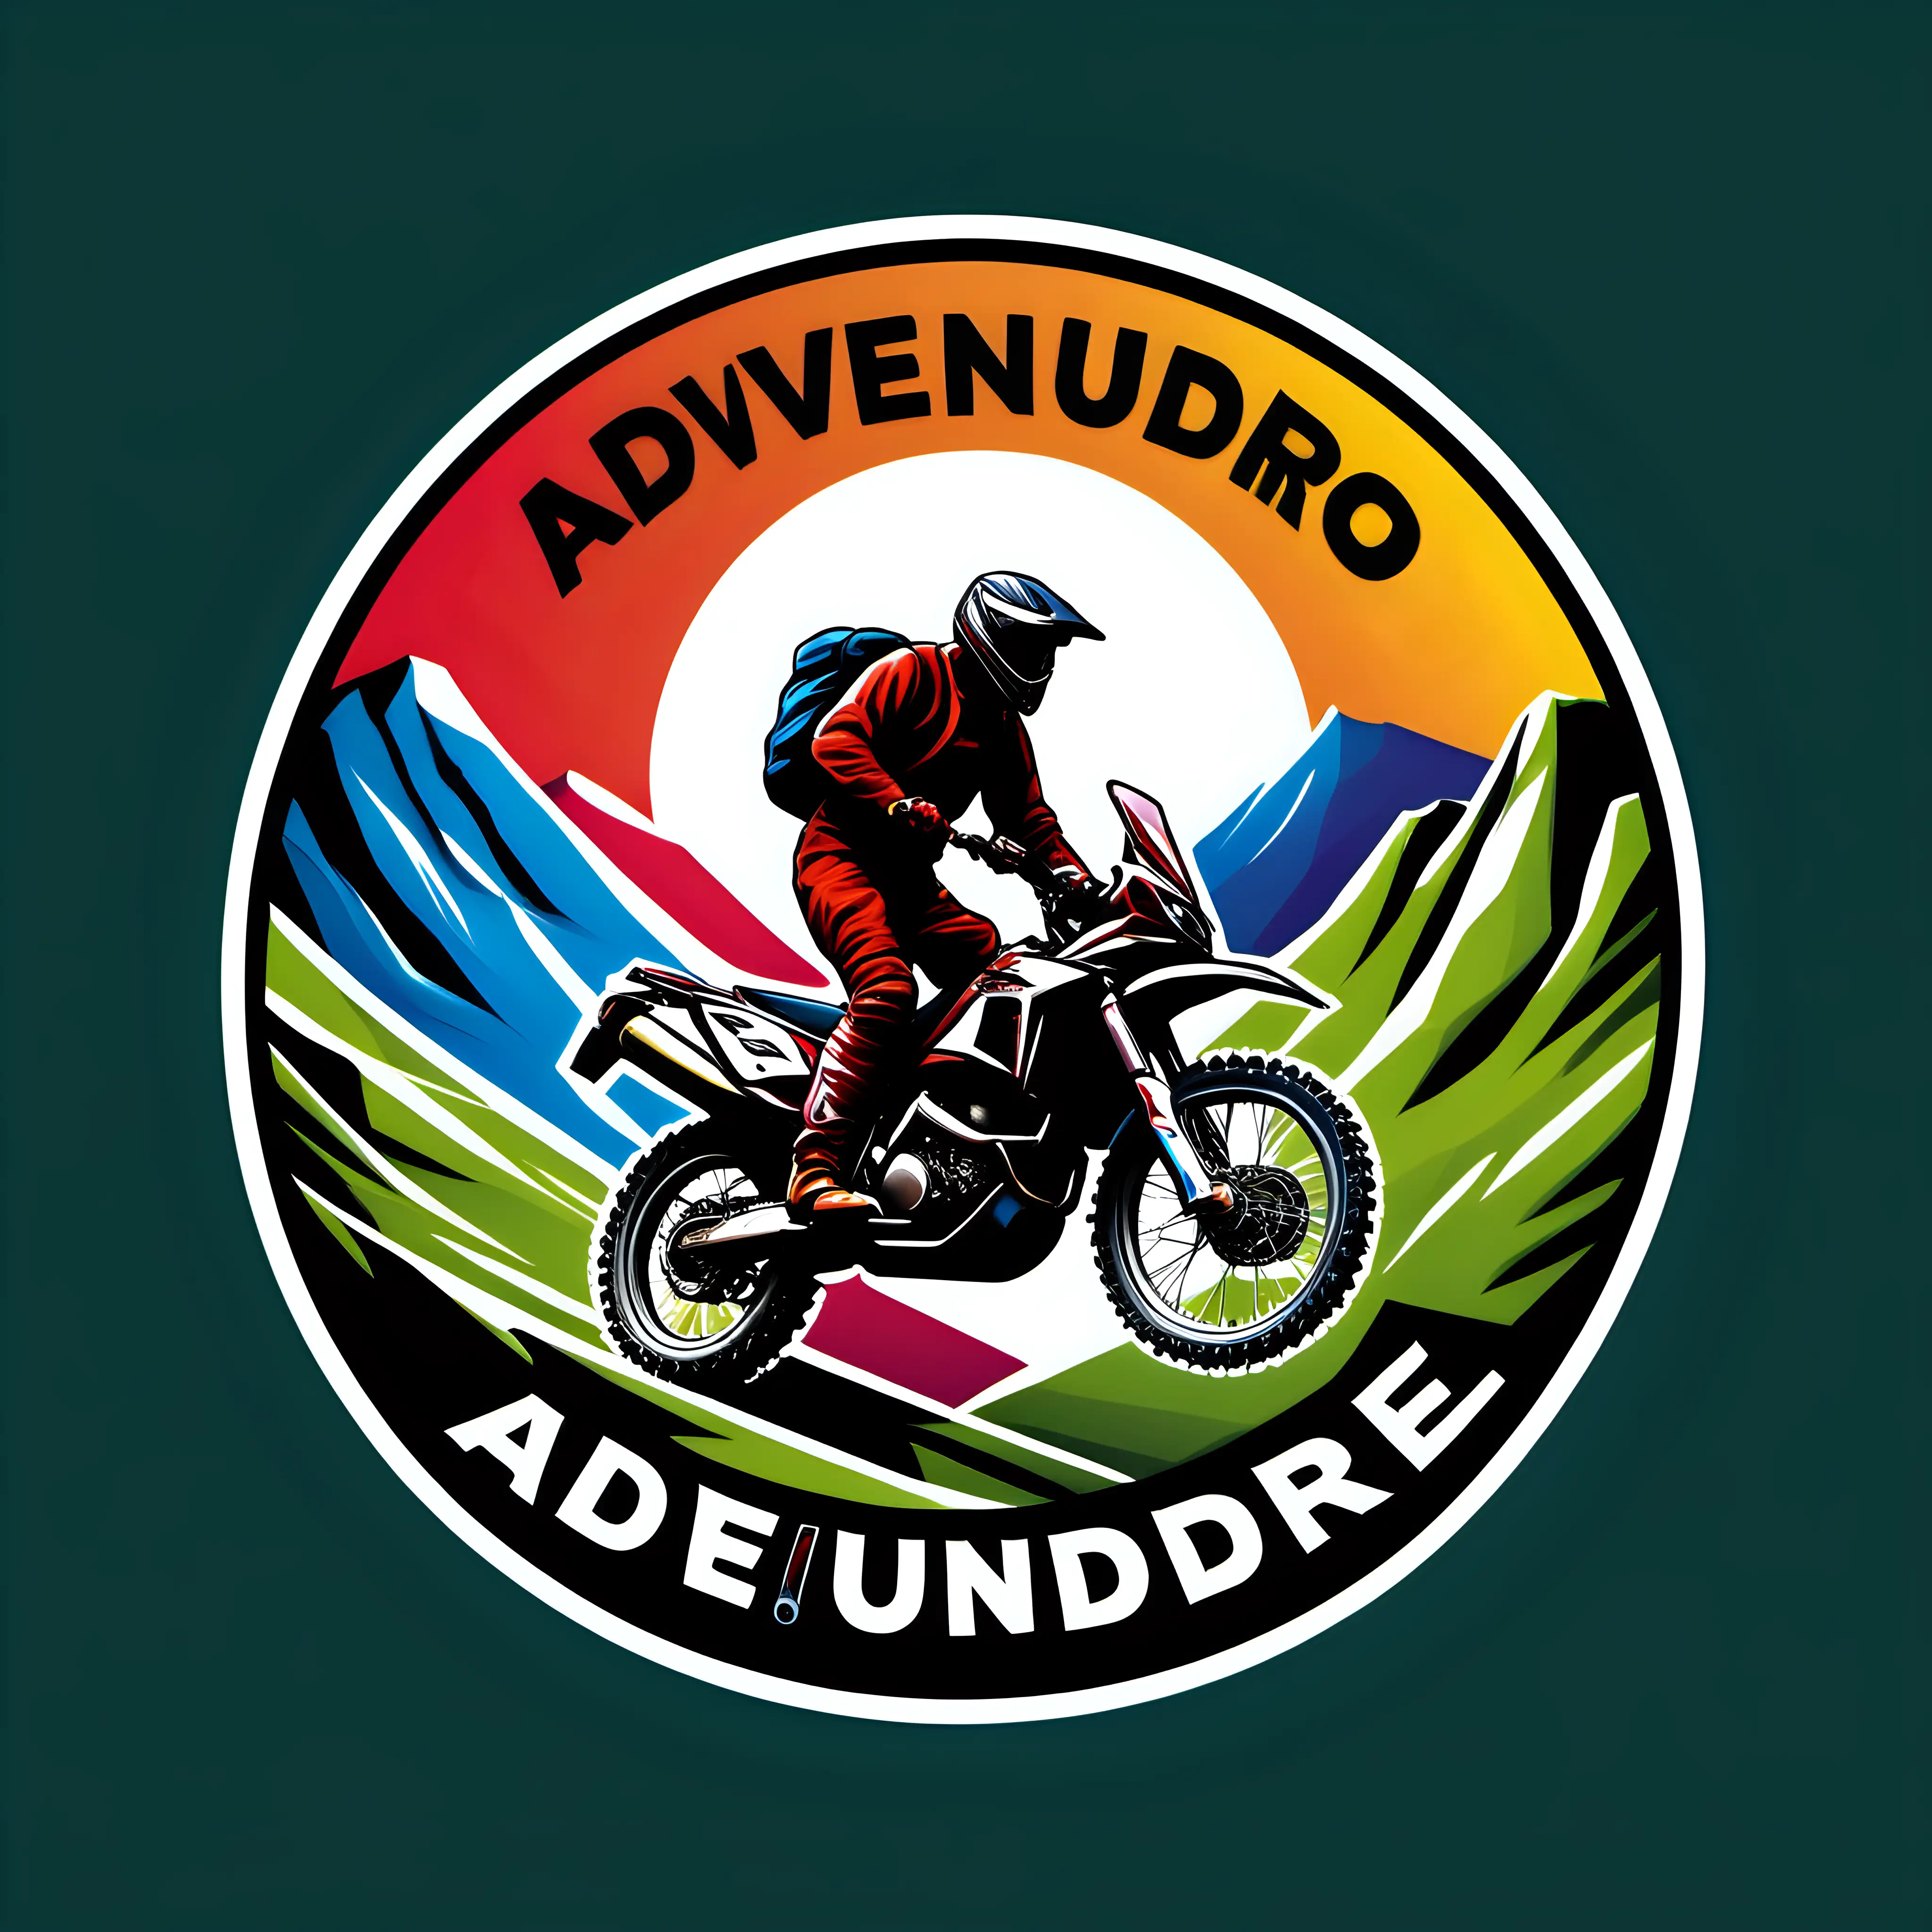 A vivid round logo with the word ADVENDURO in it, that shows a rally motorbike and a rider climbing a mountain.